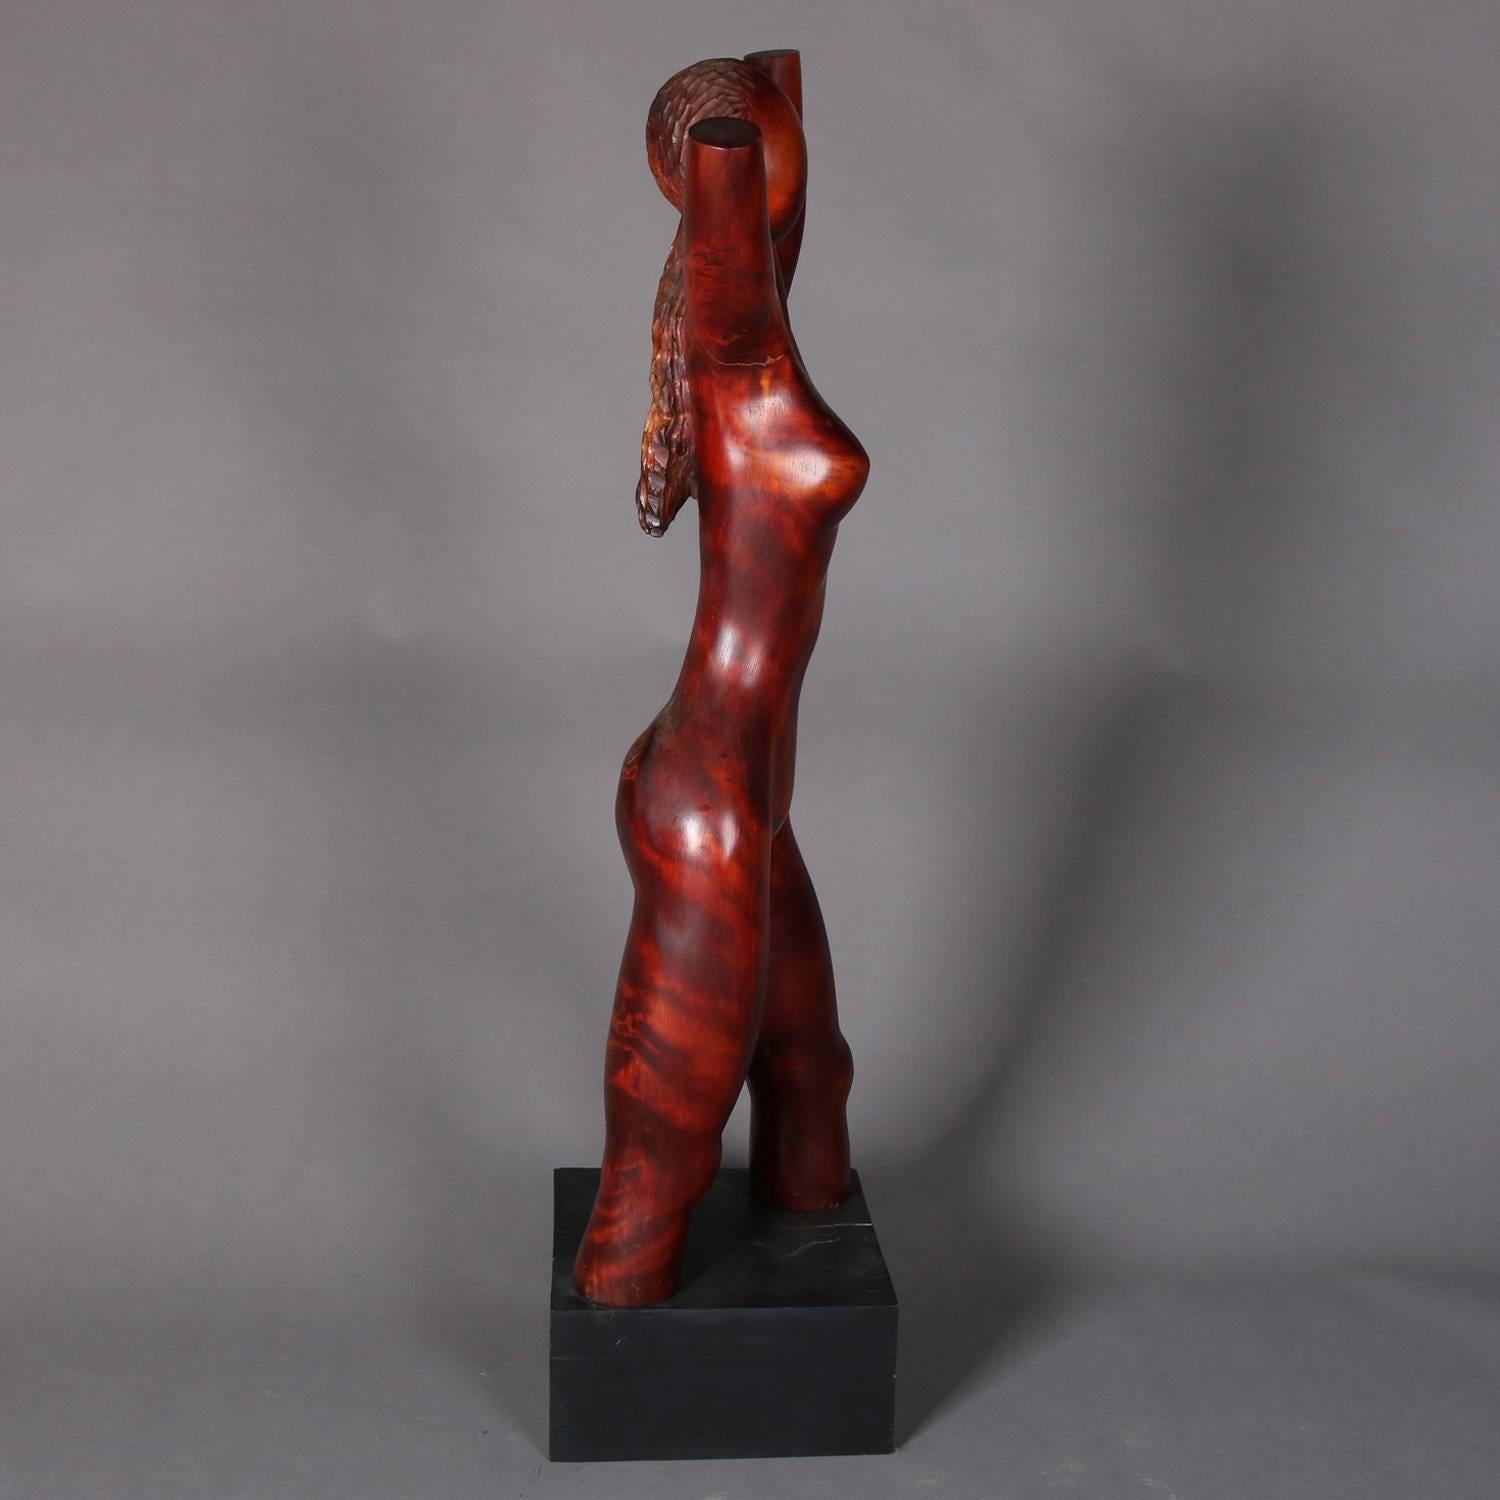 Hand-Carved Tall Mid-Century Modern Figural Carved Wood Sculpture, Nude Female Torso